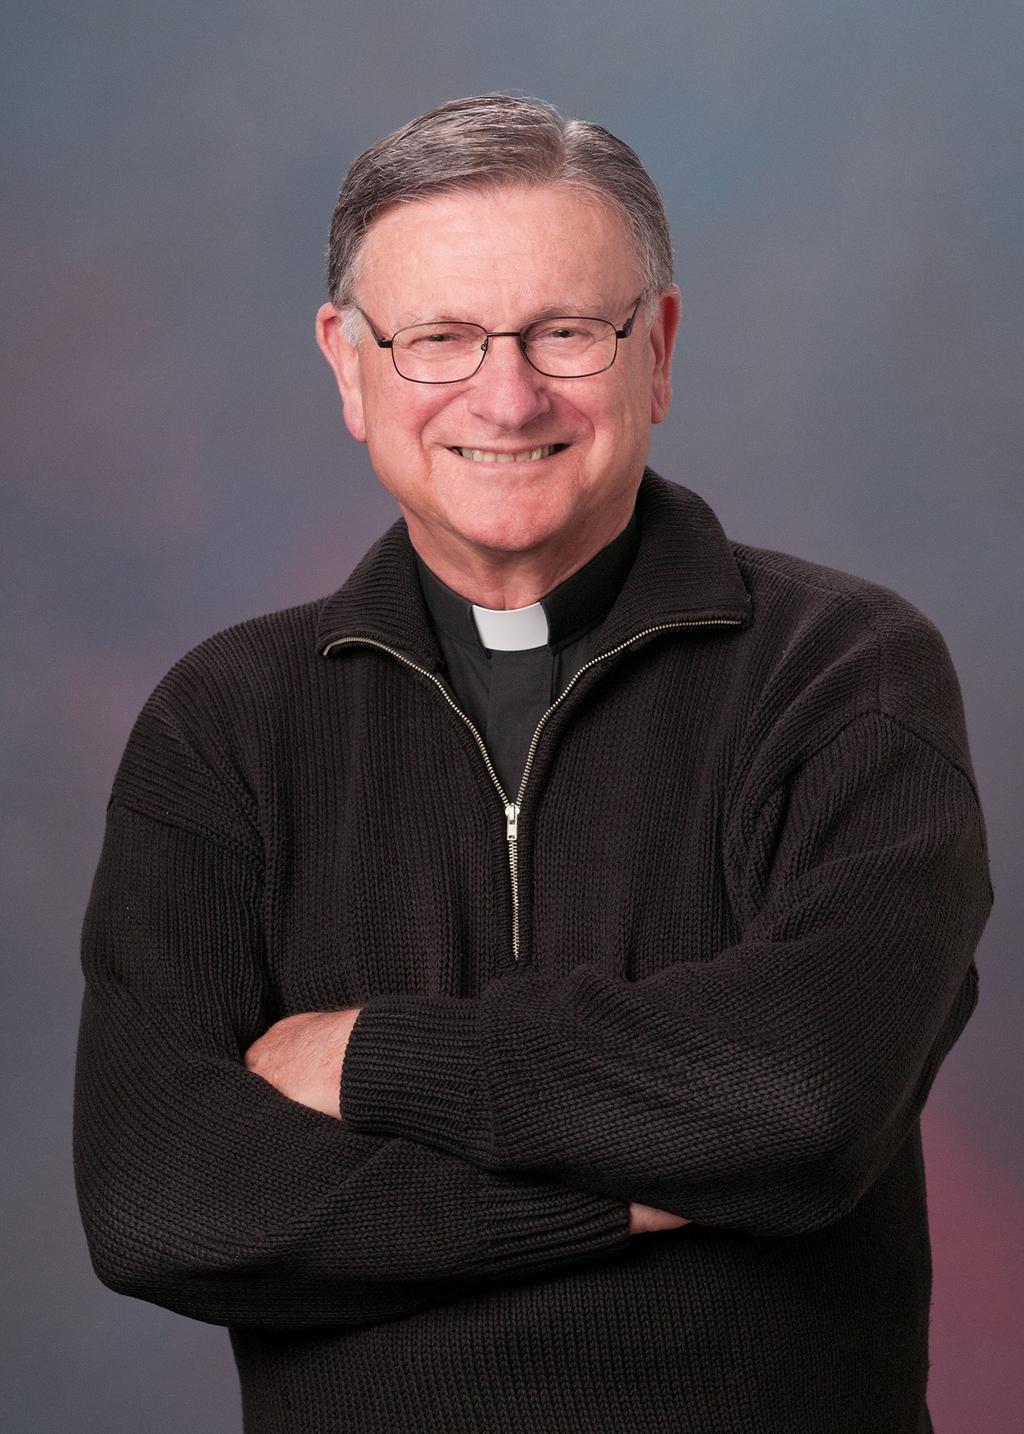 Eighth Sunday in Ordinary Time Page 5 March 3, 2019 Save The Date! Parish Lenten Retreat March 30th Rev. Thomas L. Vandenberg We are delighted to have Fr.